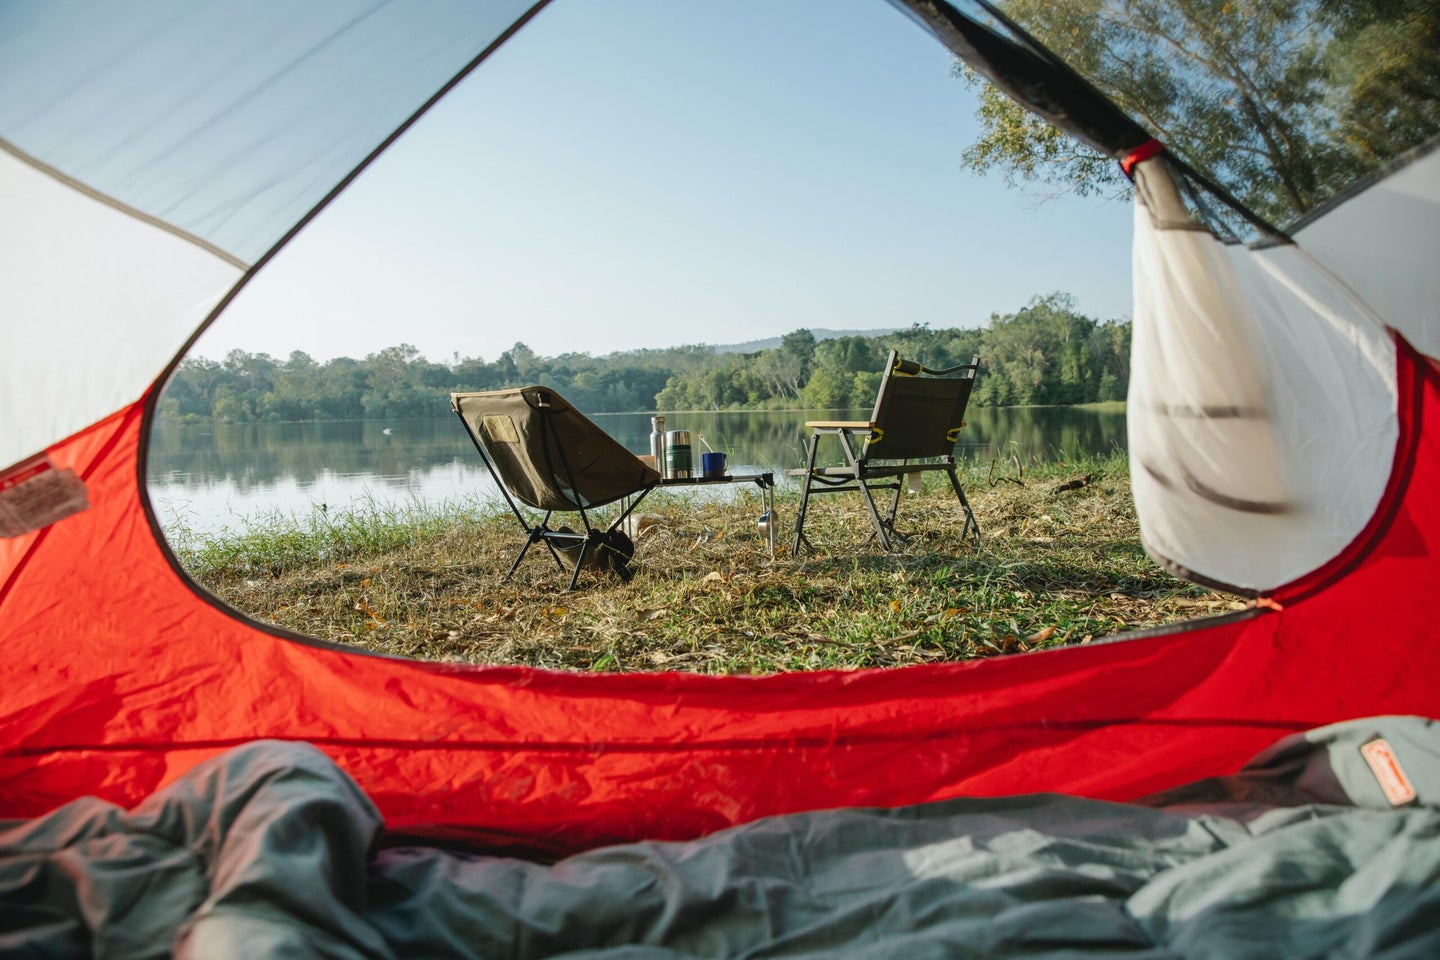 Find the best camping gear on Black Friday